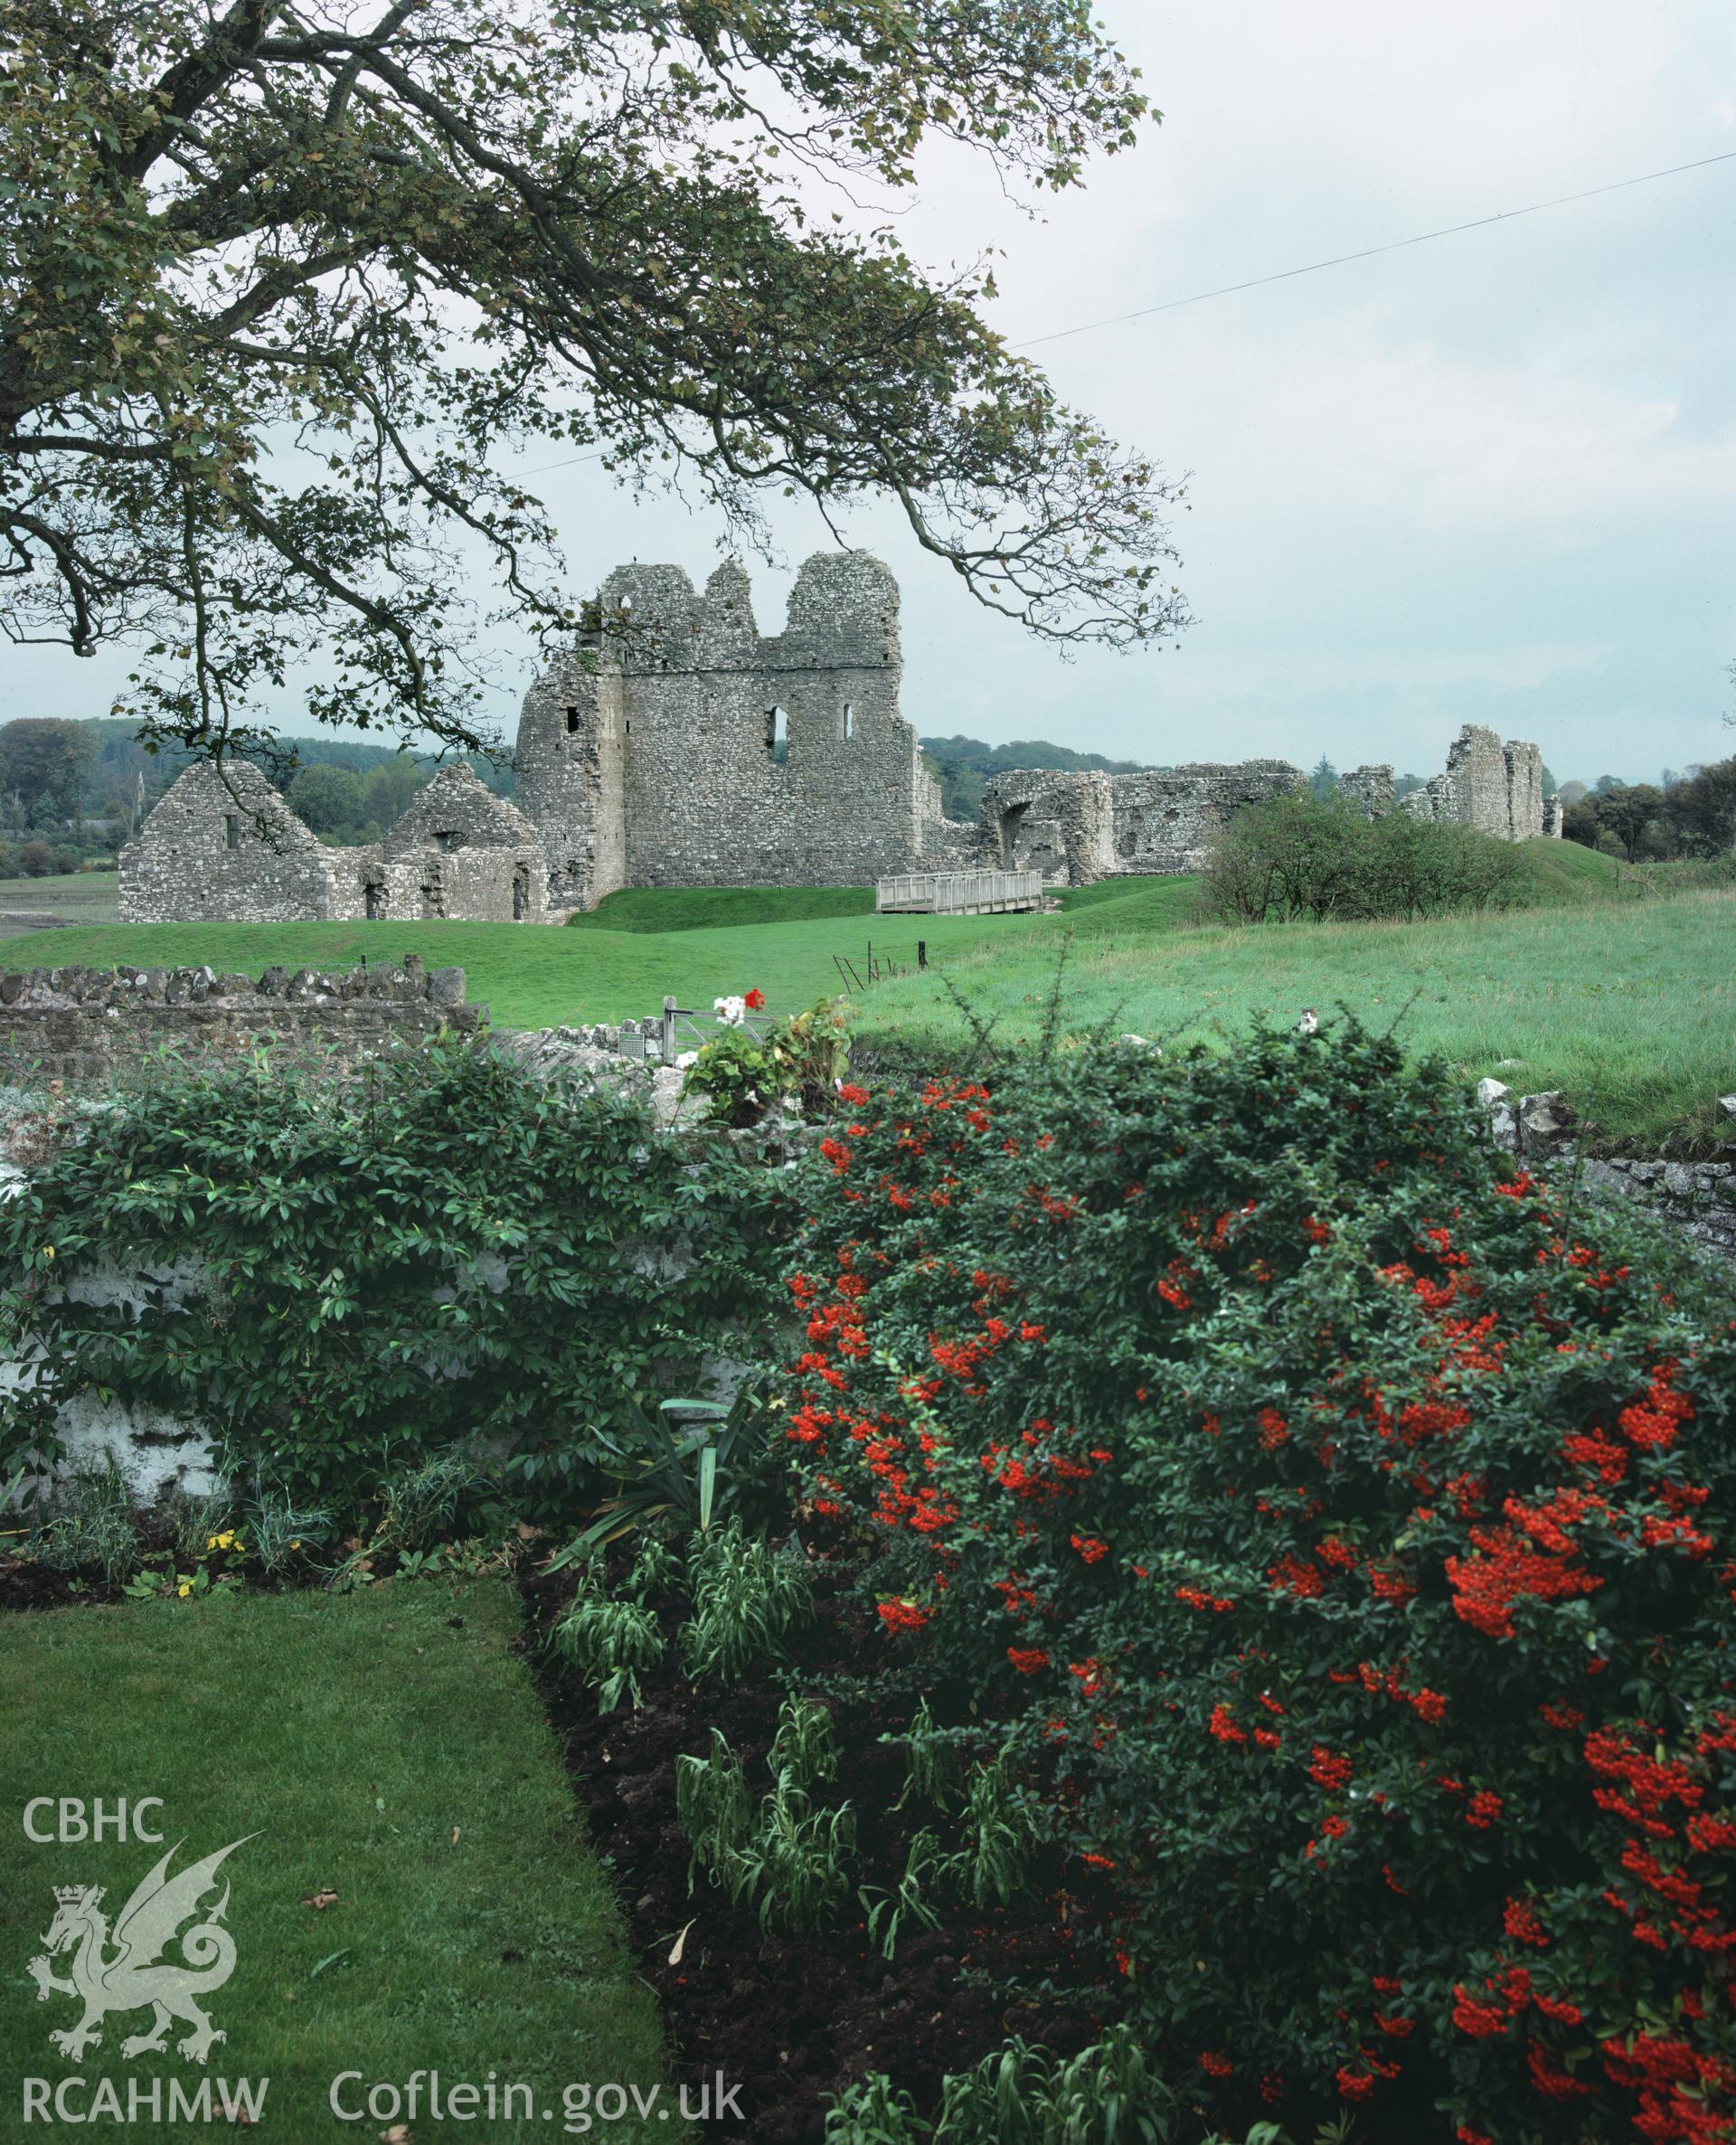 RCAHMW colour transparency showing landscape view of Ogmore Castle, taken by Iain Wright, c.1991